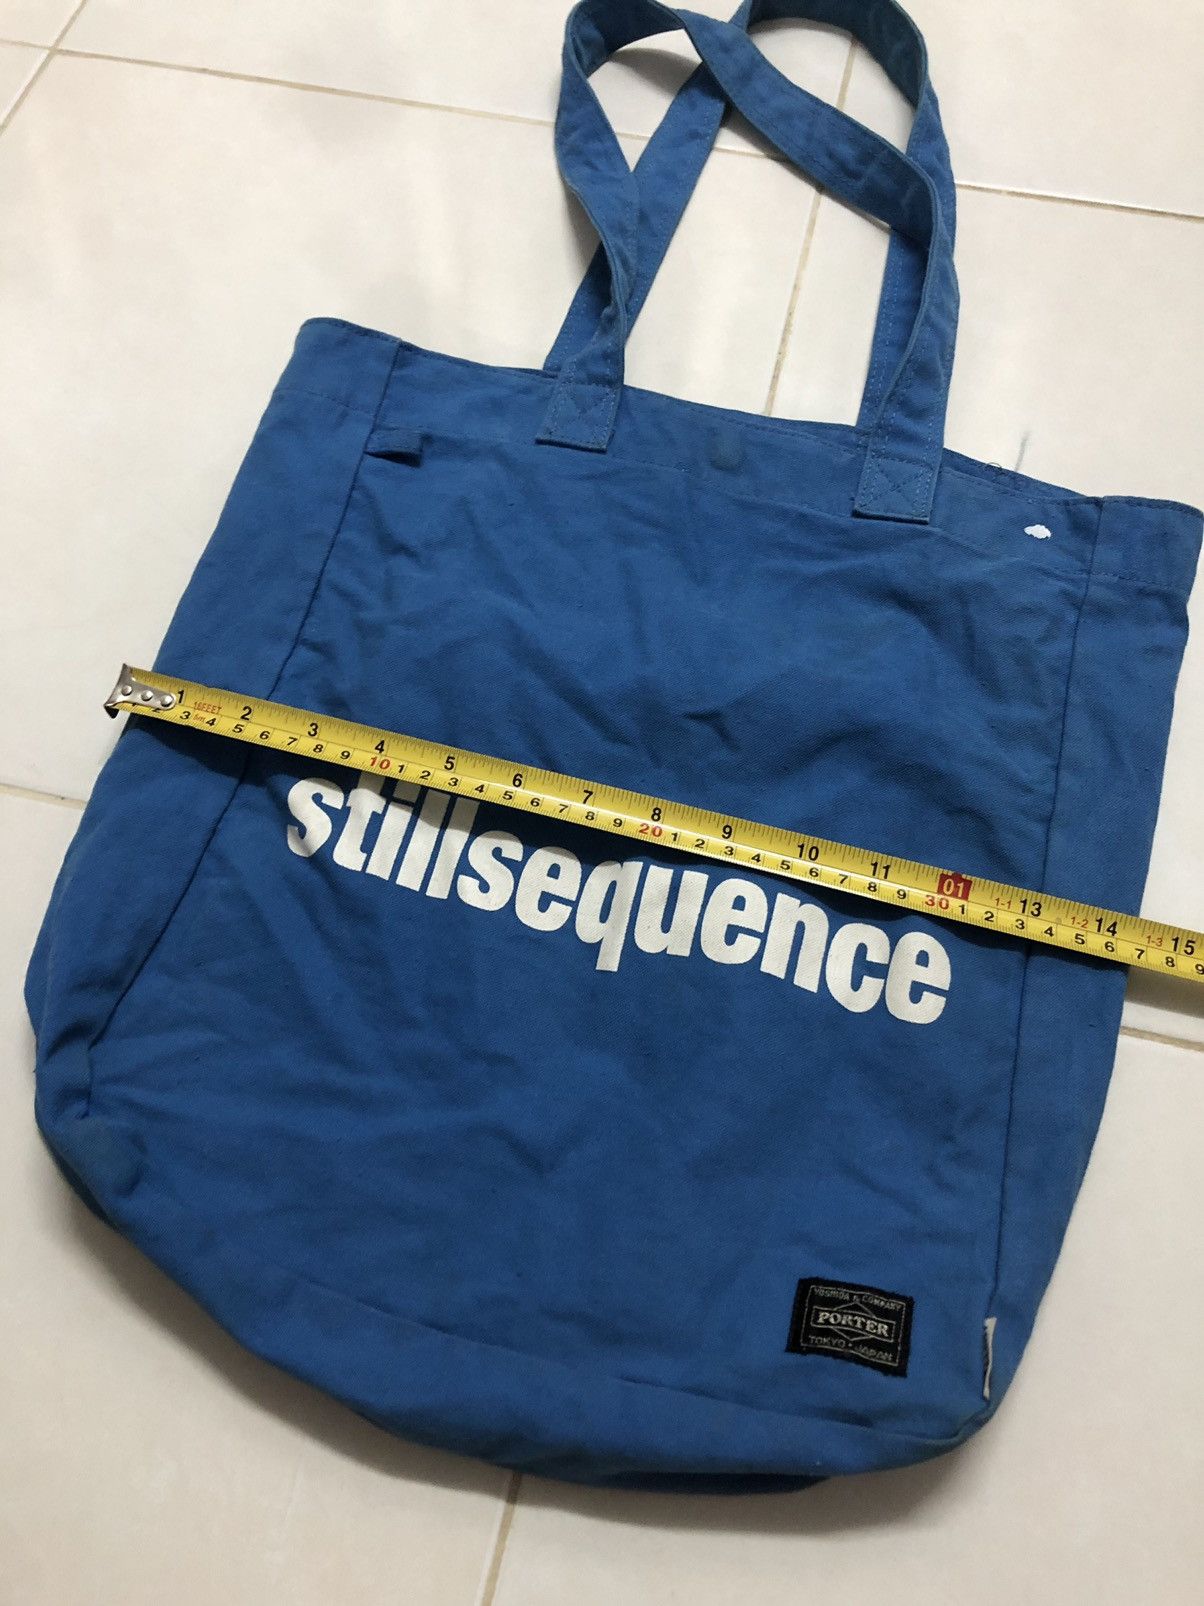 Porter X Gallery 1950 Quote Stillsequence Tote Bag - 6